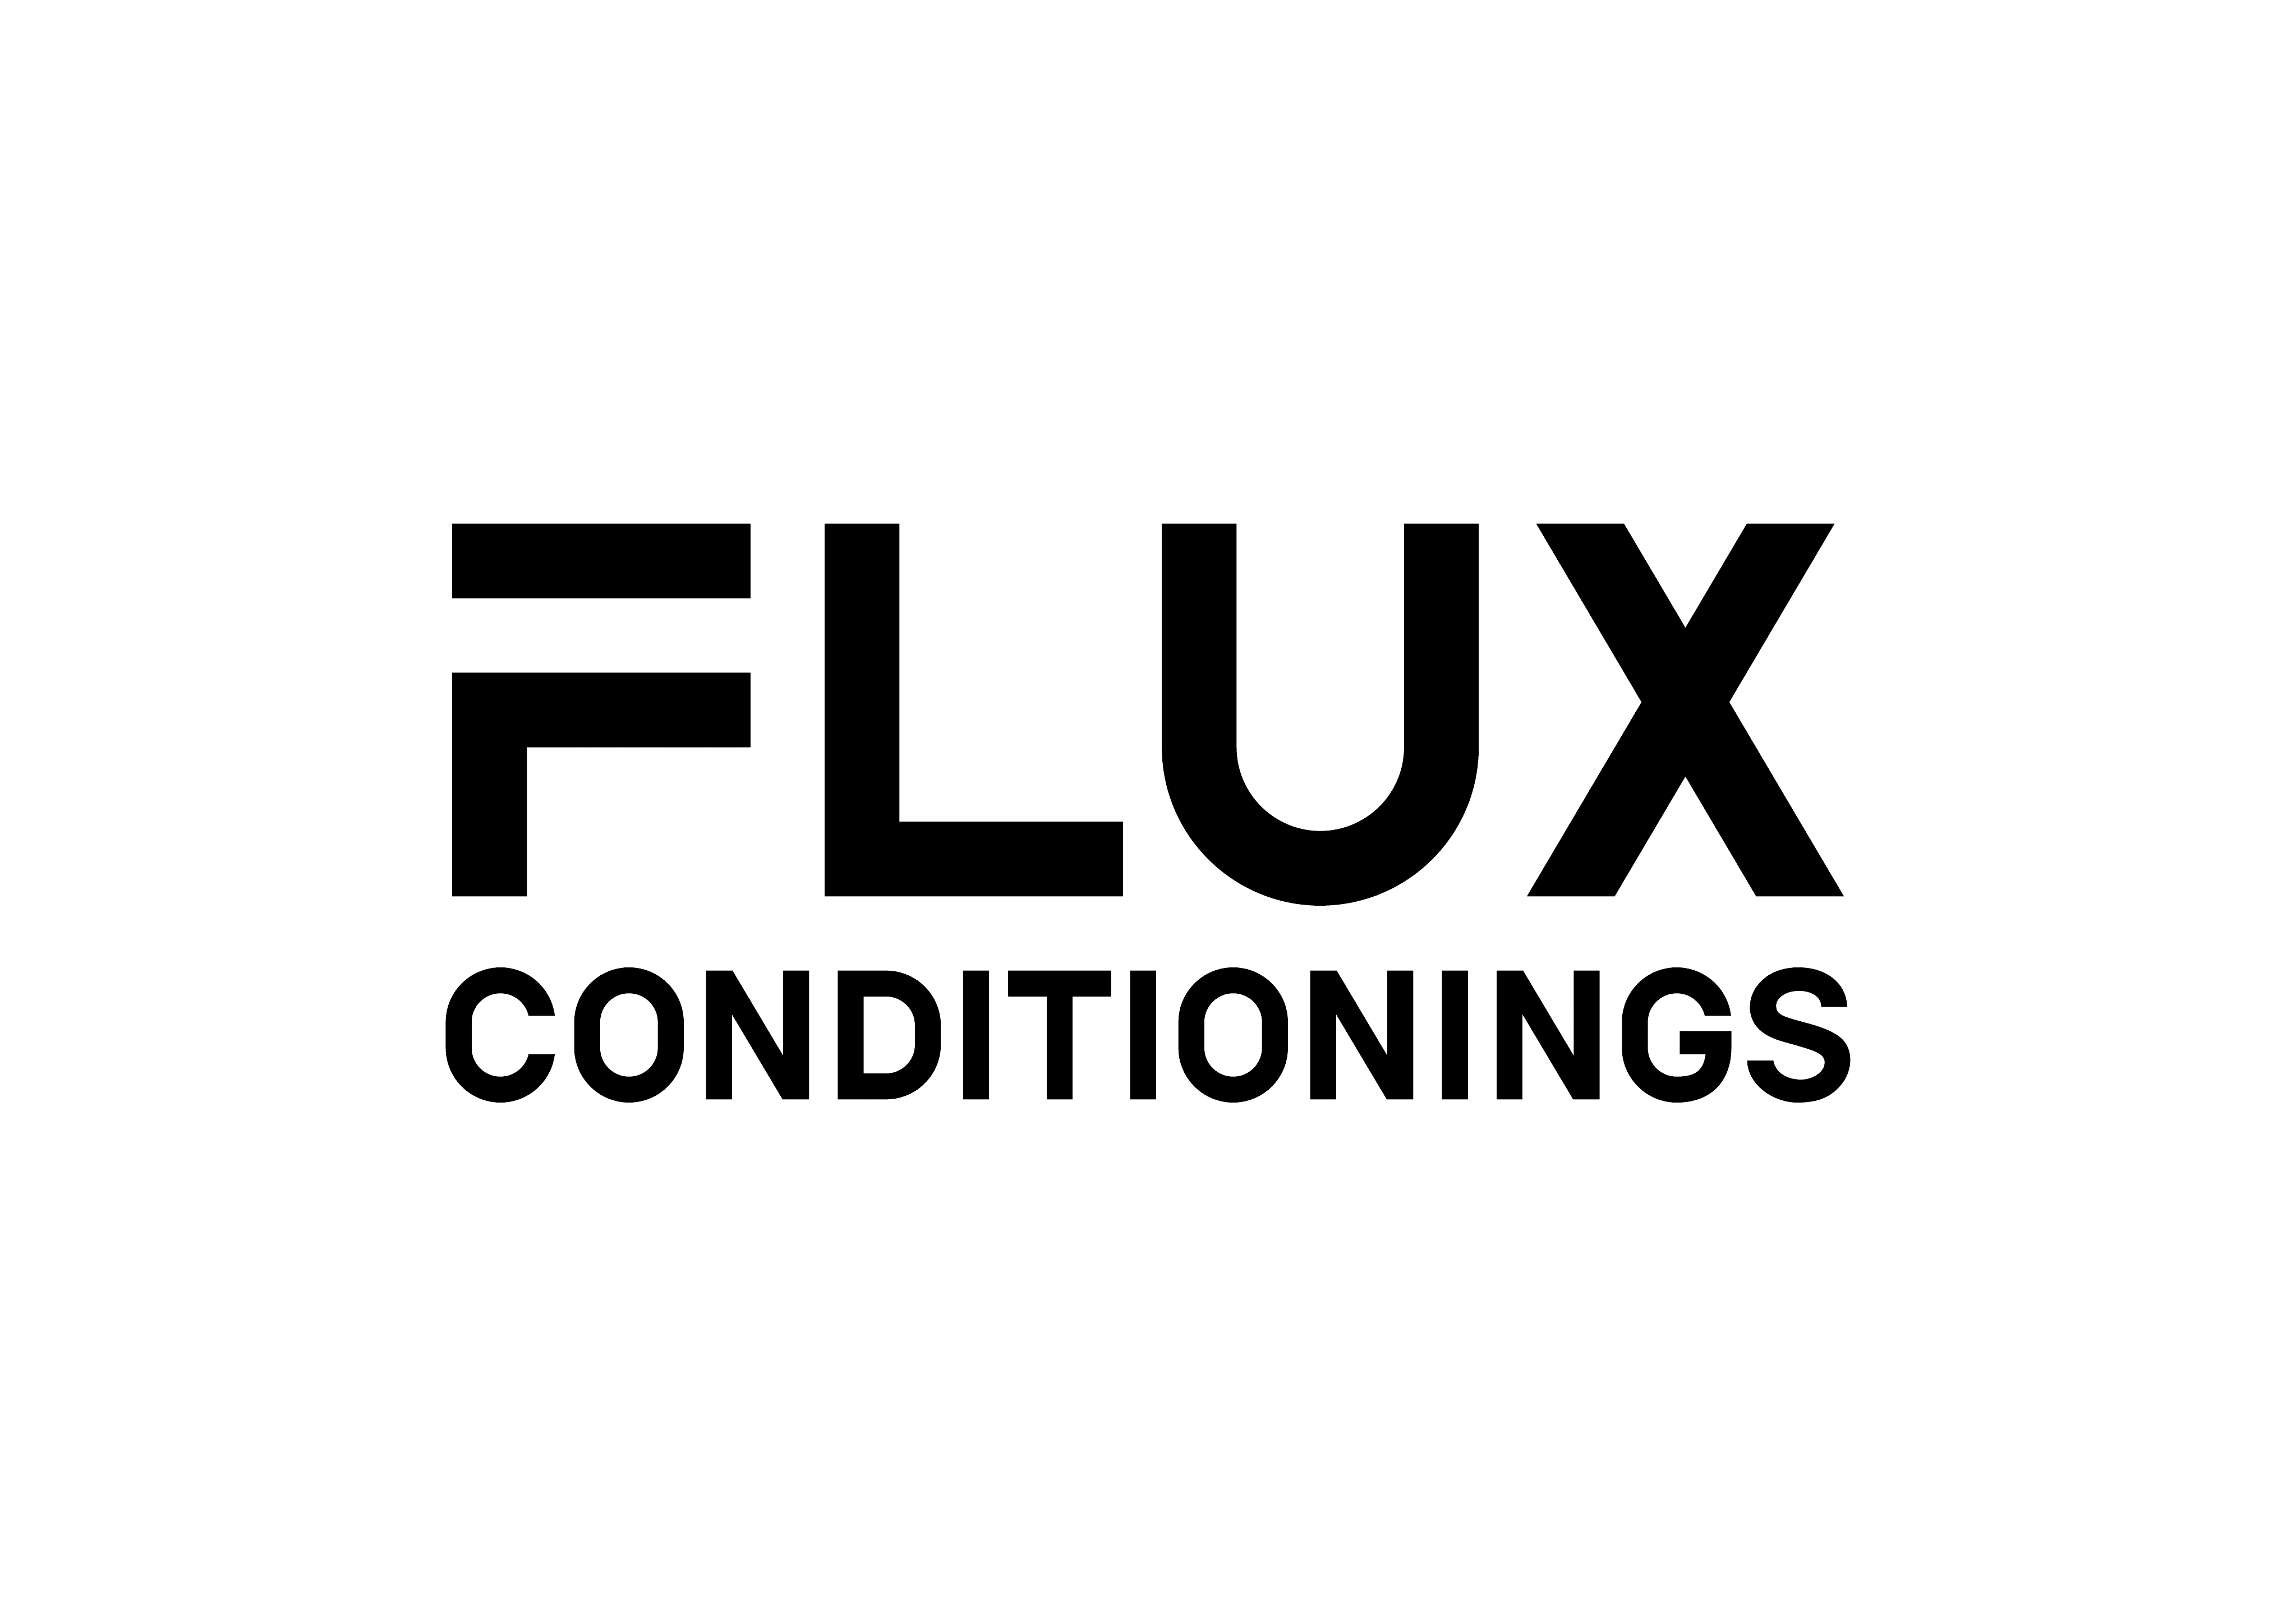 FLUX CONDITIONINGS